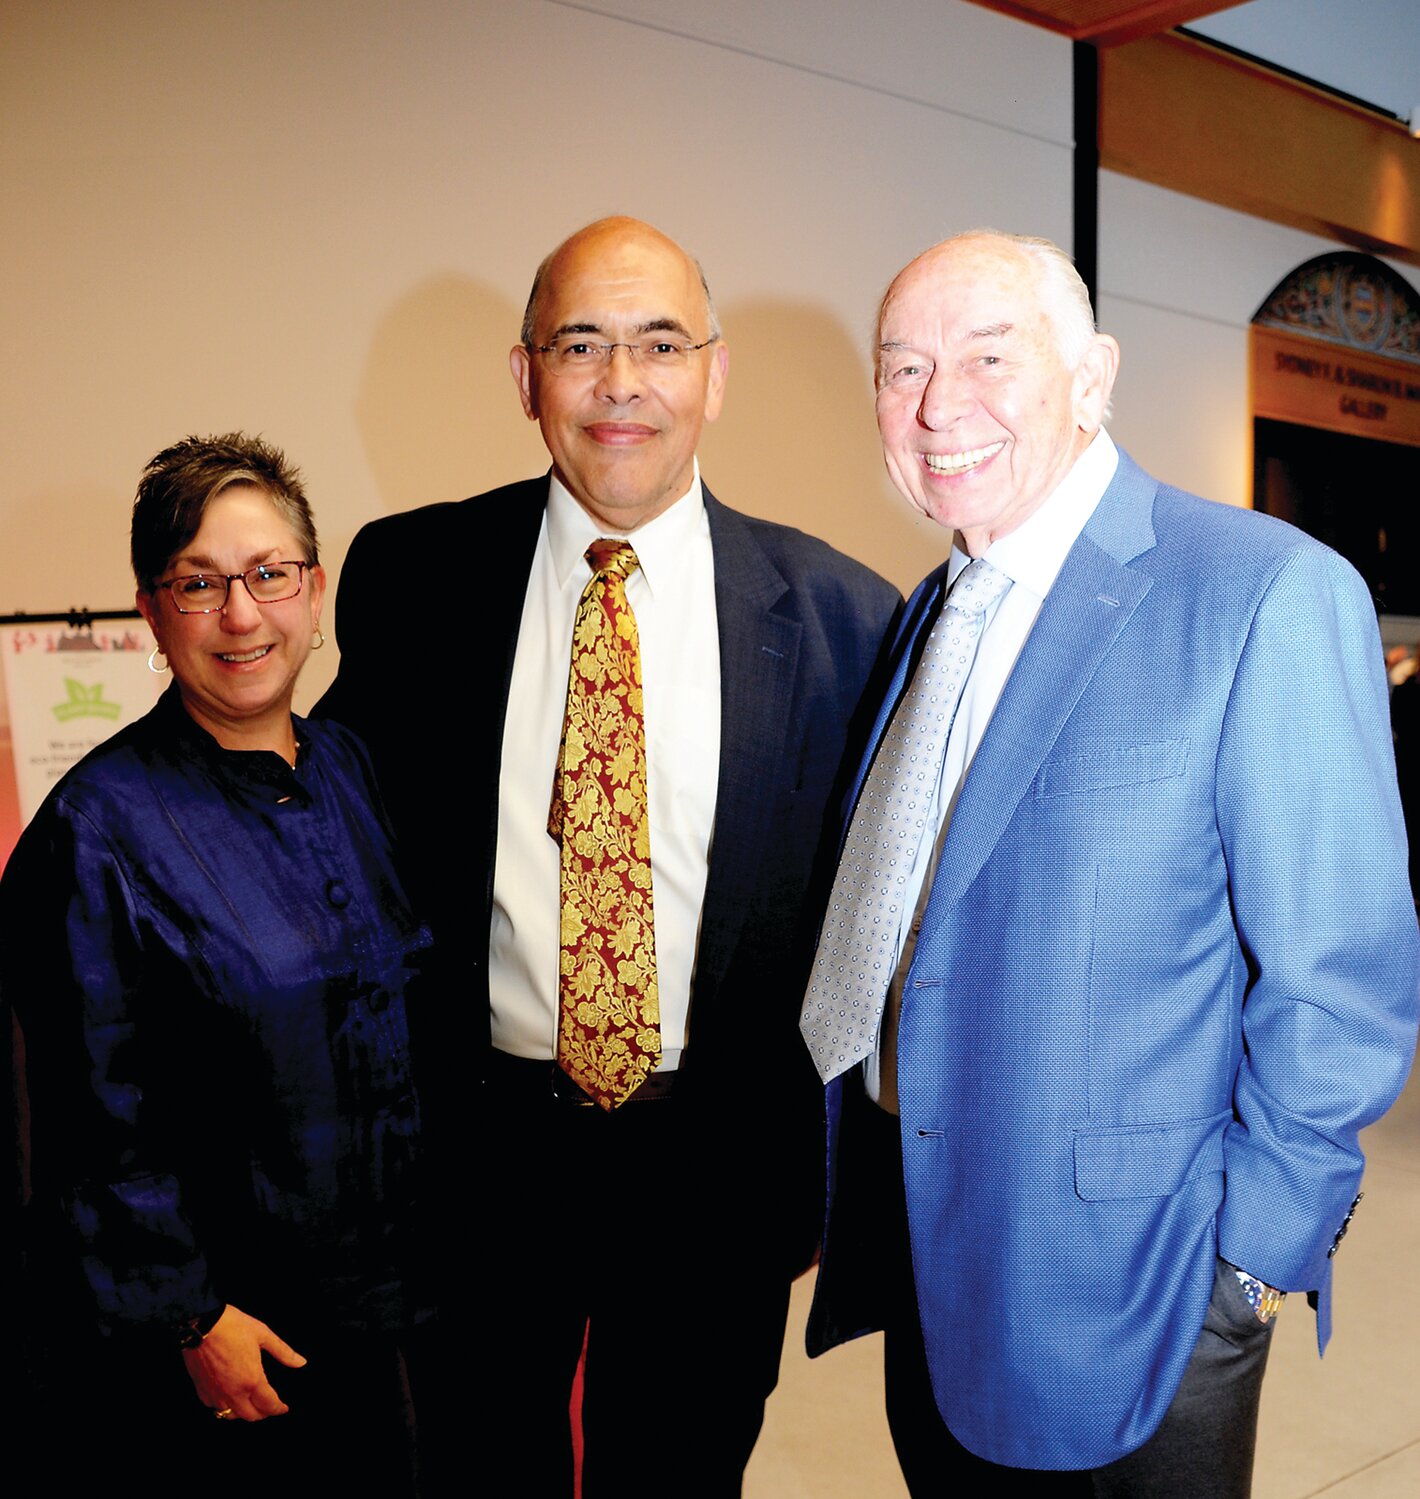 Marie and Larry Woodson stand with William Schutt.